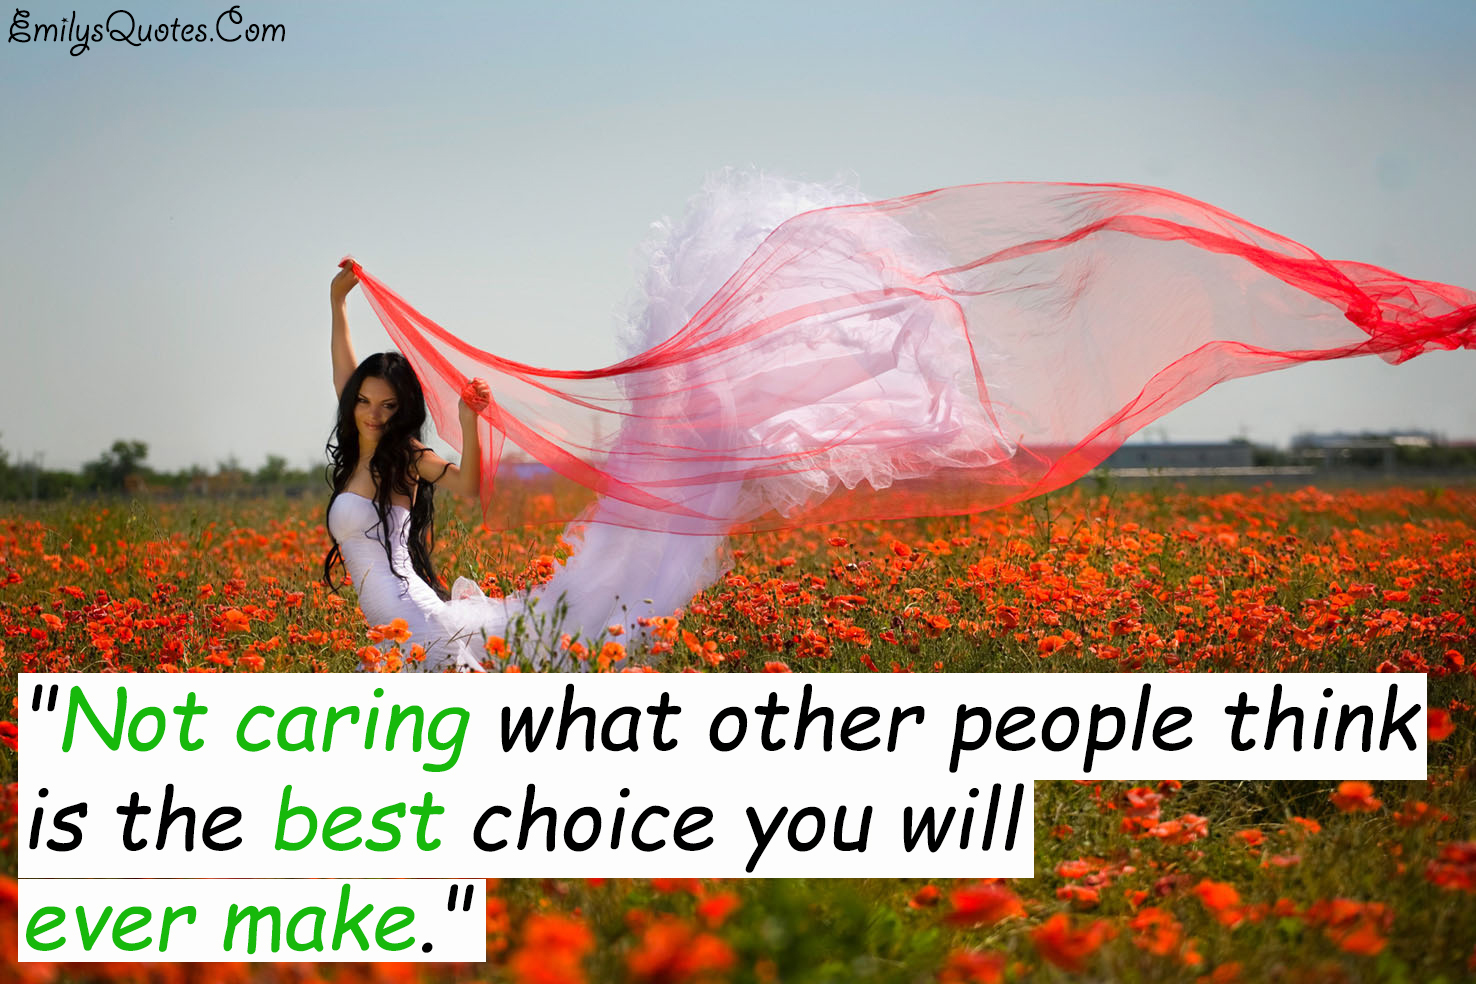 Not caring what other people think is the best choice you will ever make